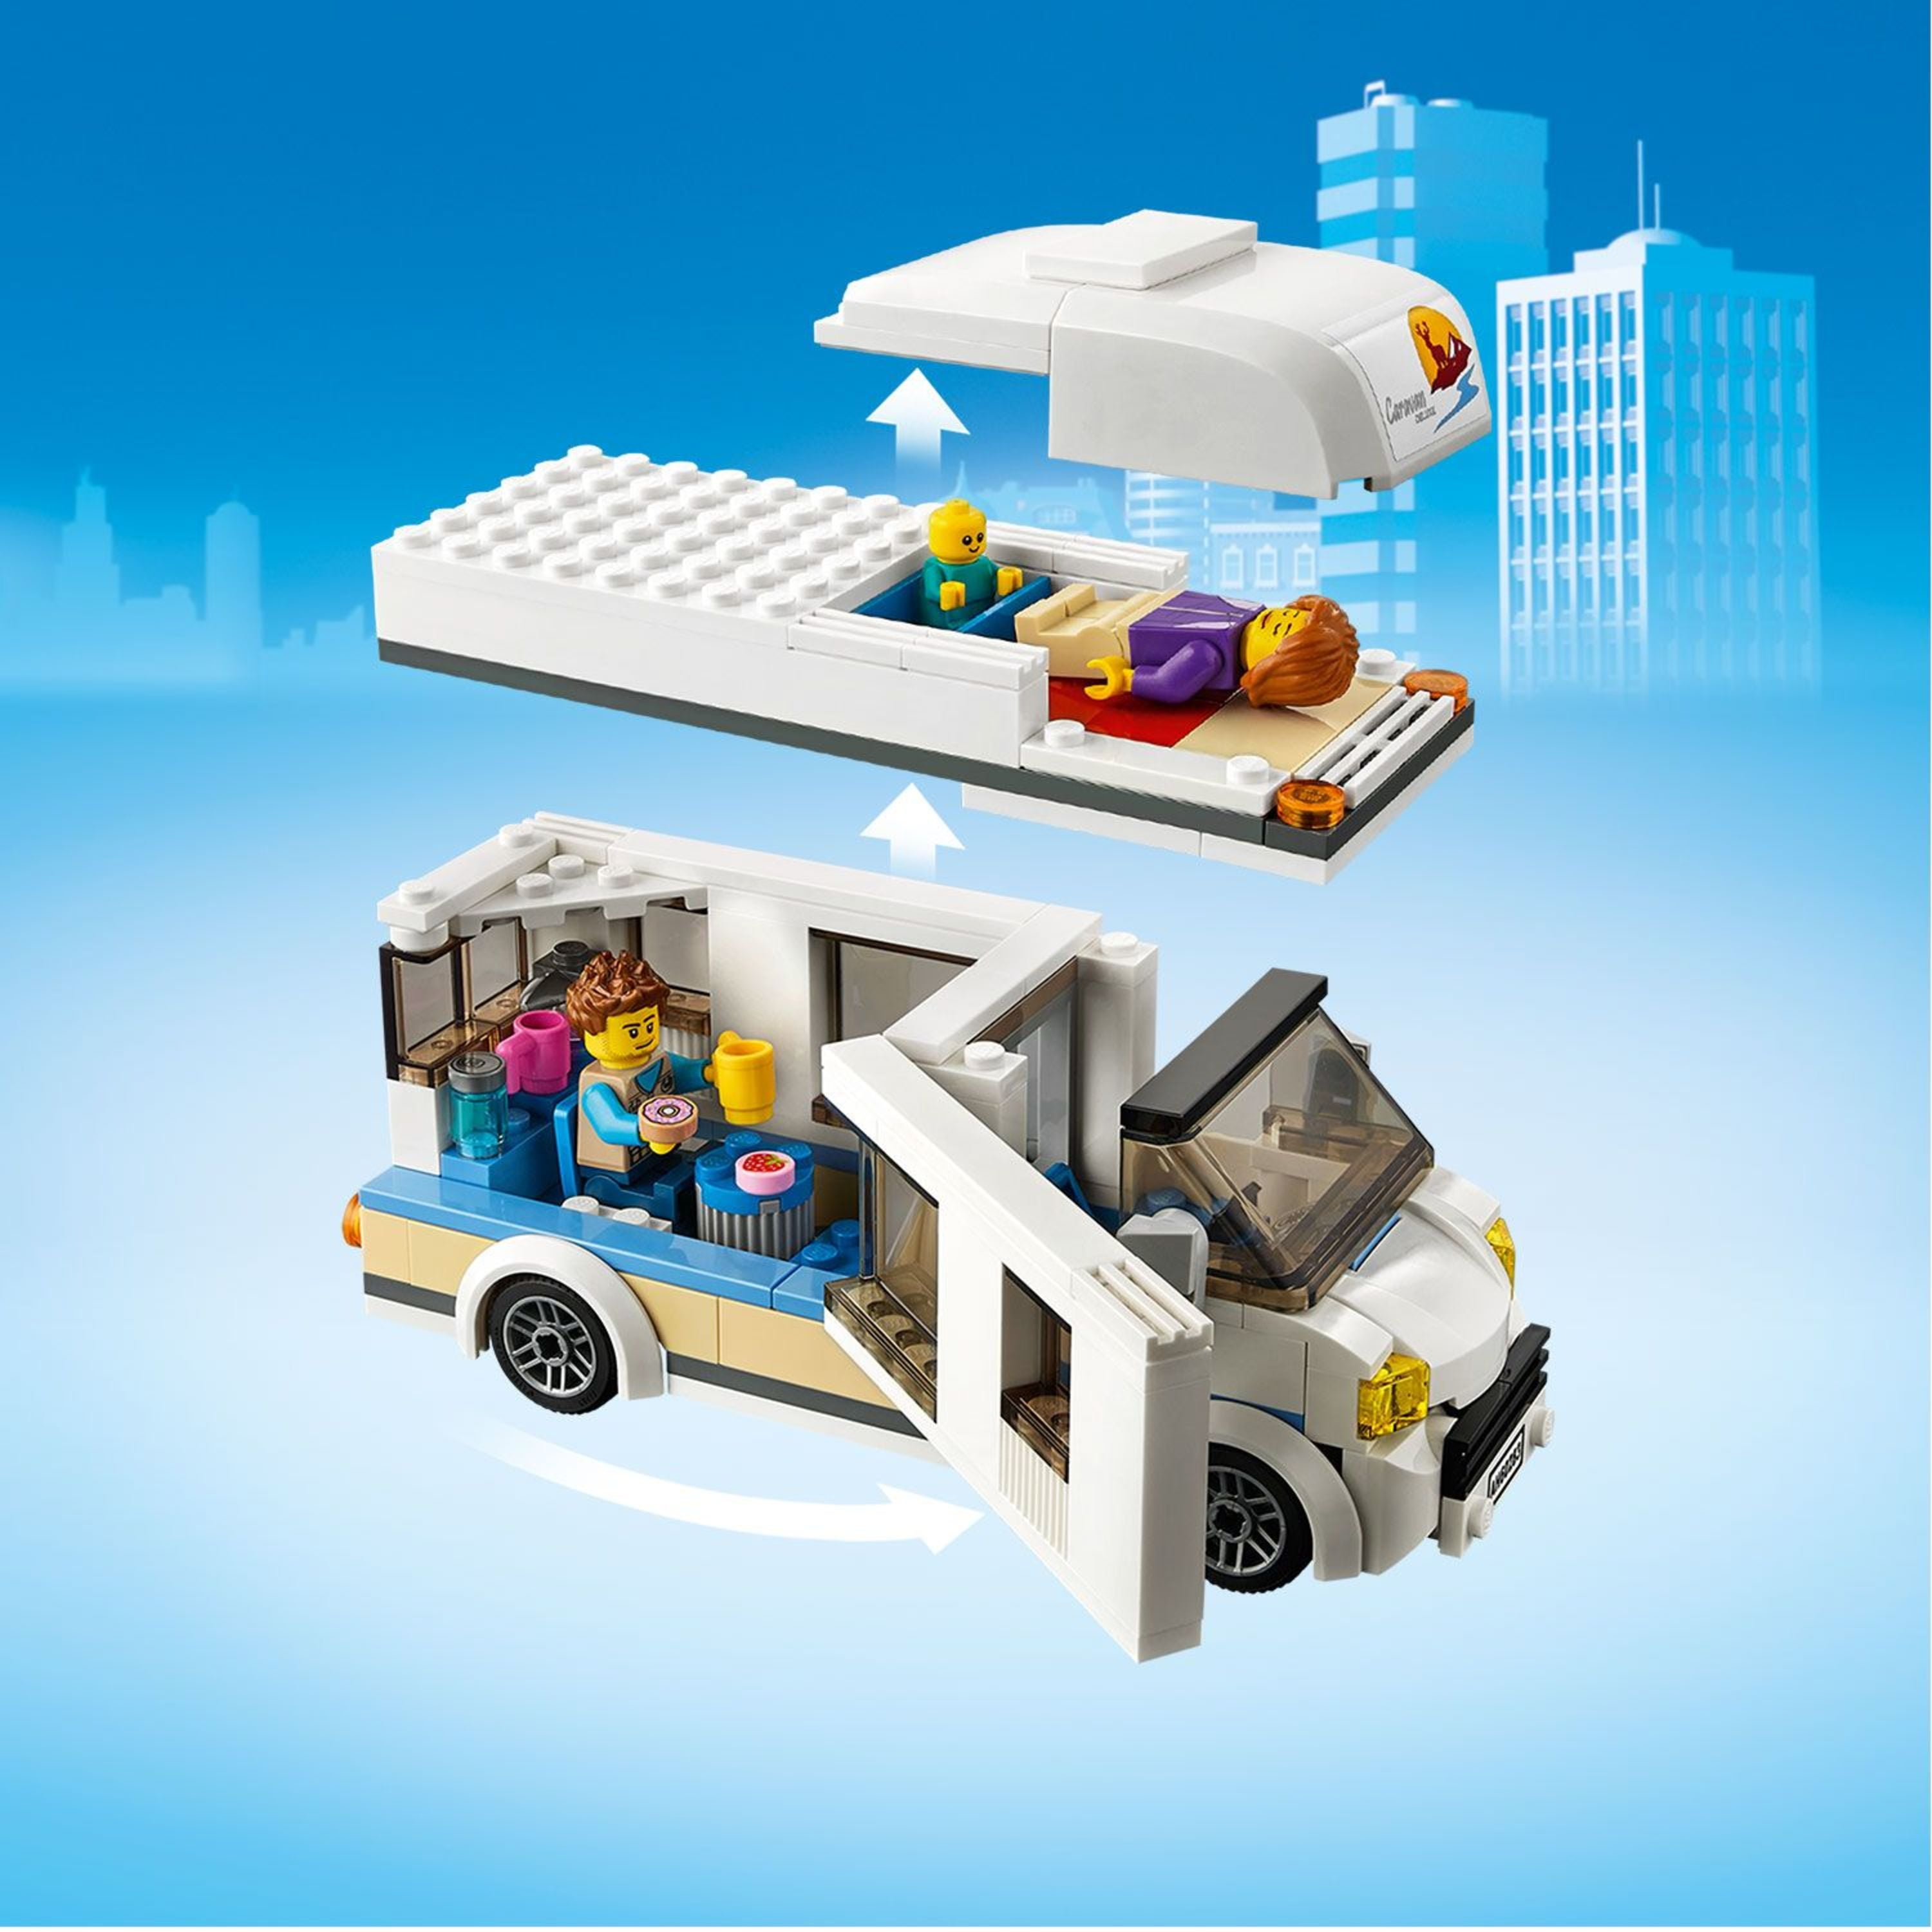 LEGO City Great Vehicles Holiday Camper Car 60283 for Kids Aged 5 Plus Years Old, Caravan Summer Sets, Gift Idea - Walmart.com